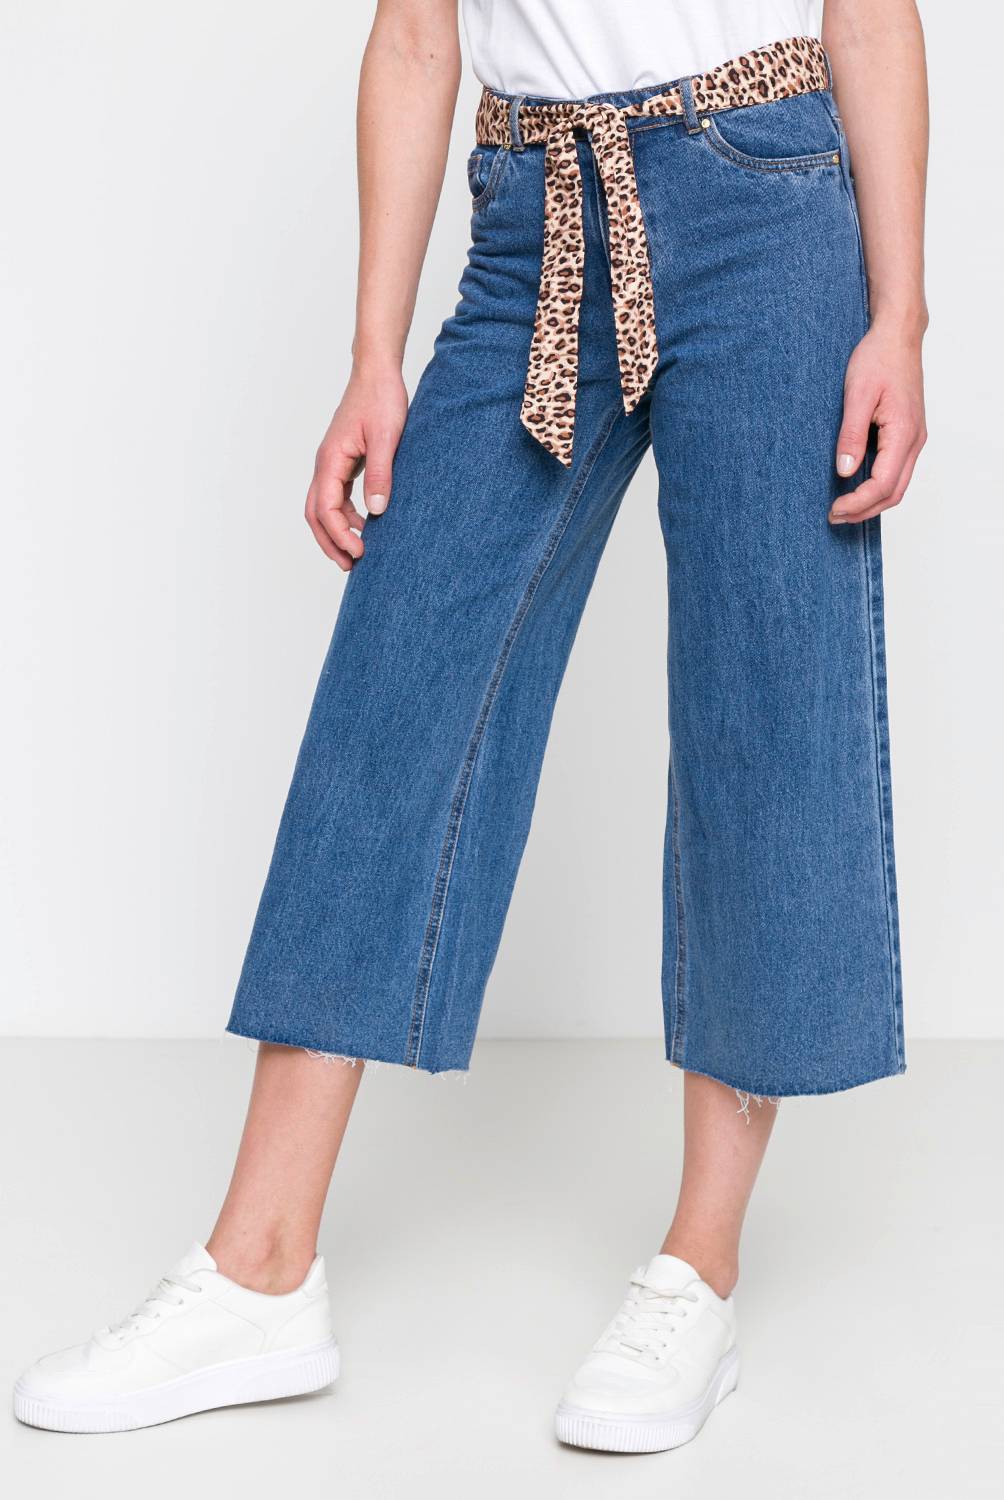 ONLY - Jeans Palazzo Fit Mujer